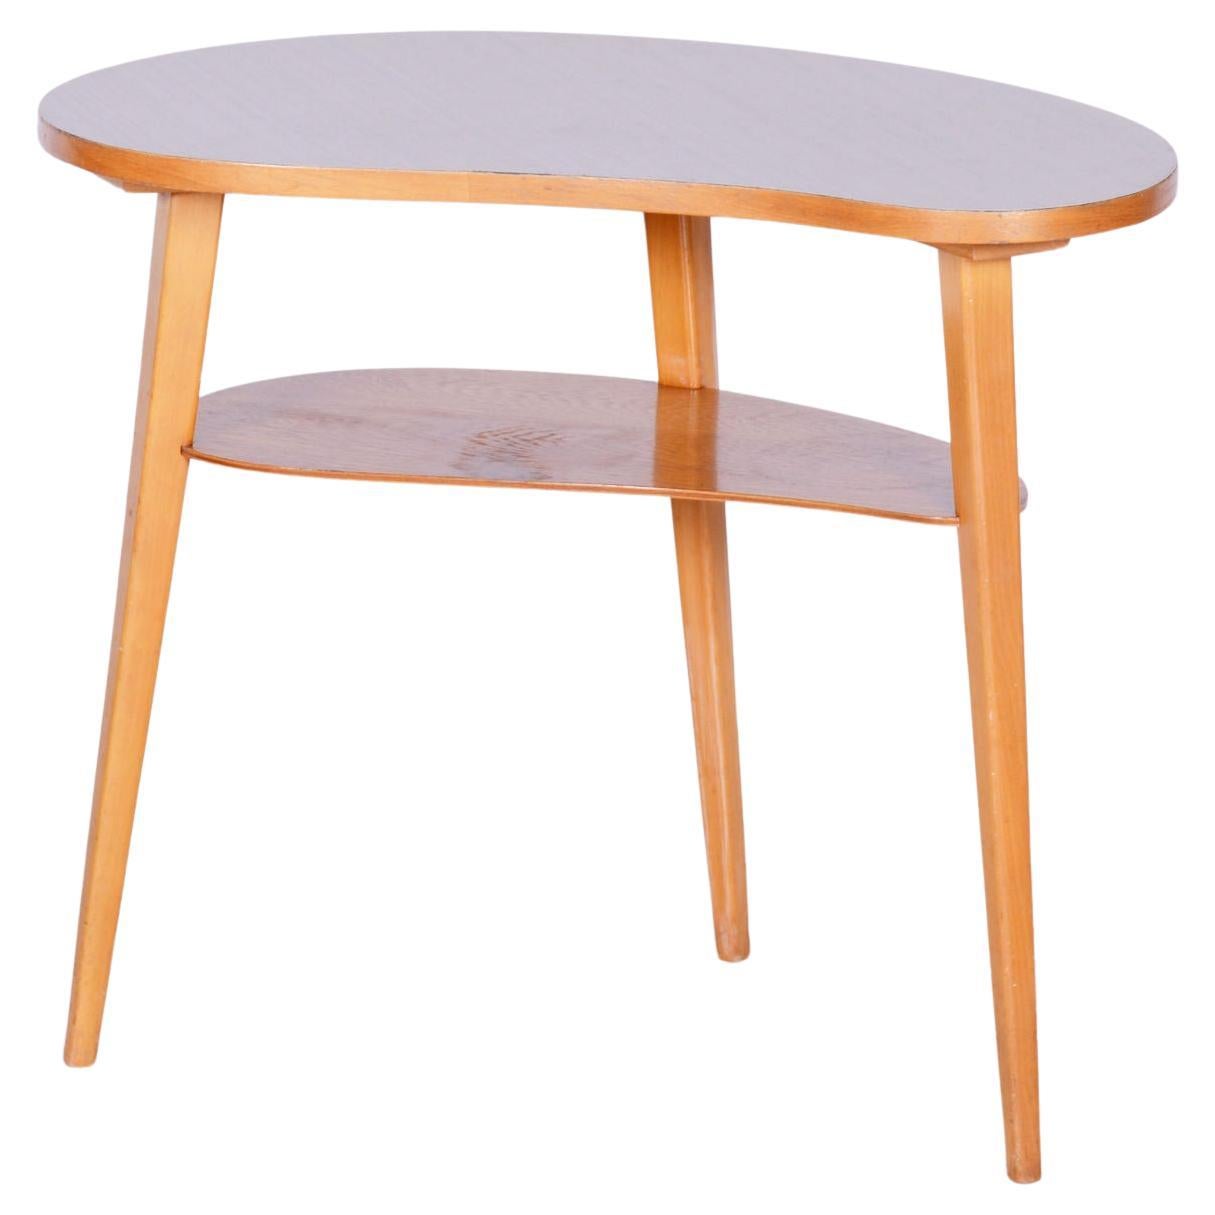 Original Beech MidCentury Small Table, Well Preserved Condition, Czechia, 1950s For Sale